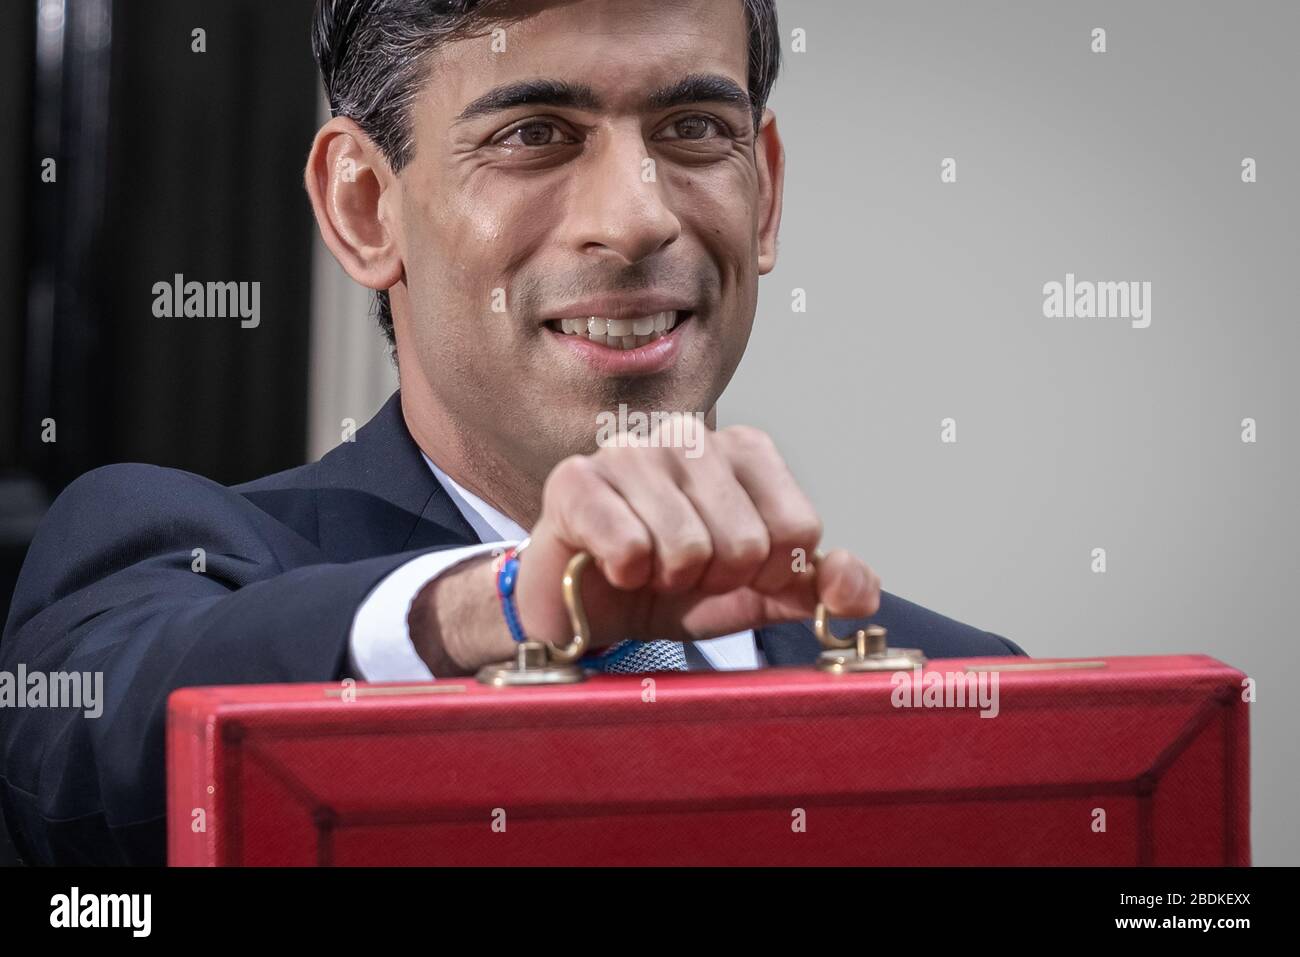 Budget 2020: Chancellor Rishi Sunak poses outside 11 Downing Street with the red Budget box before delivering his first budget statement. London, UK Stock Photo